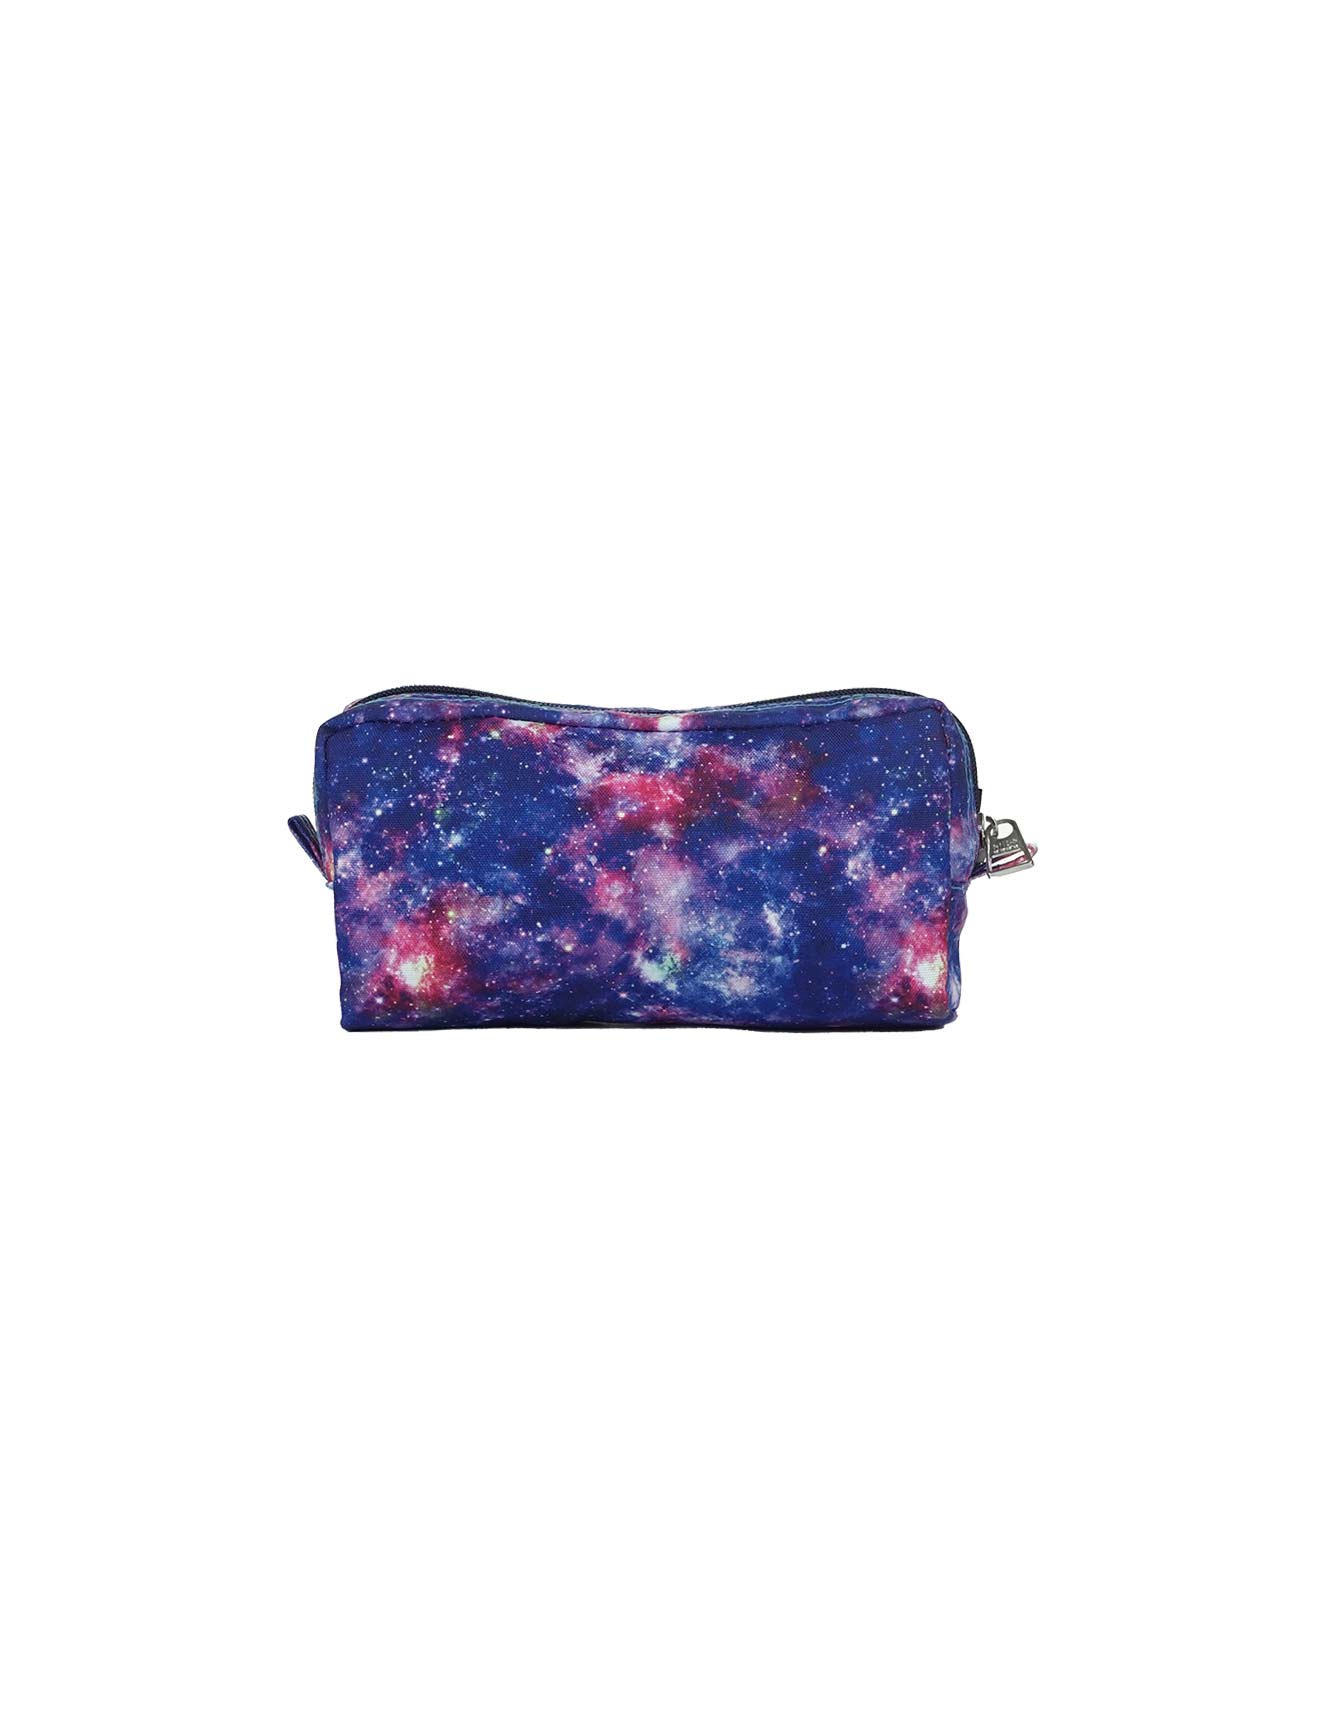 Turquoise Galaxy Pencil Case | CUBS | Go Places